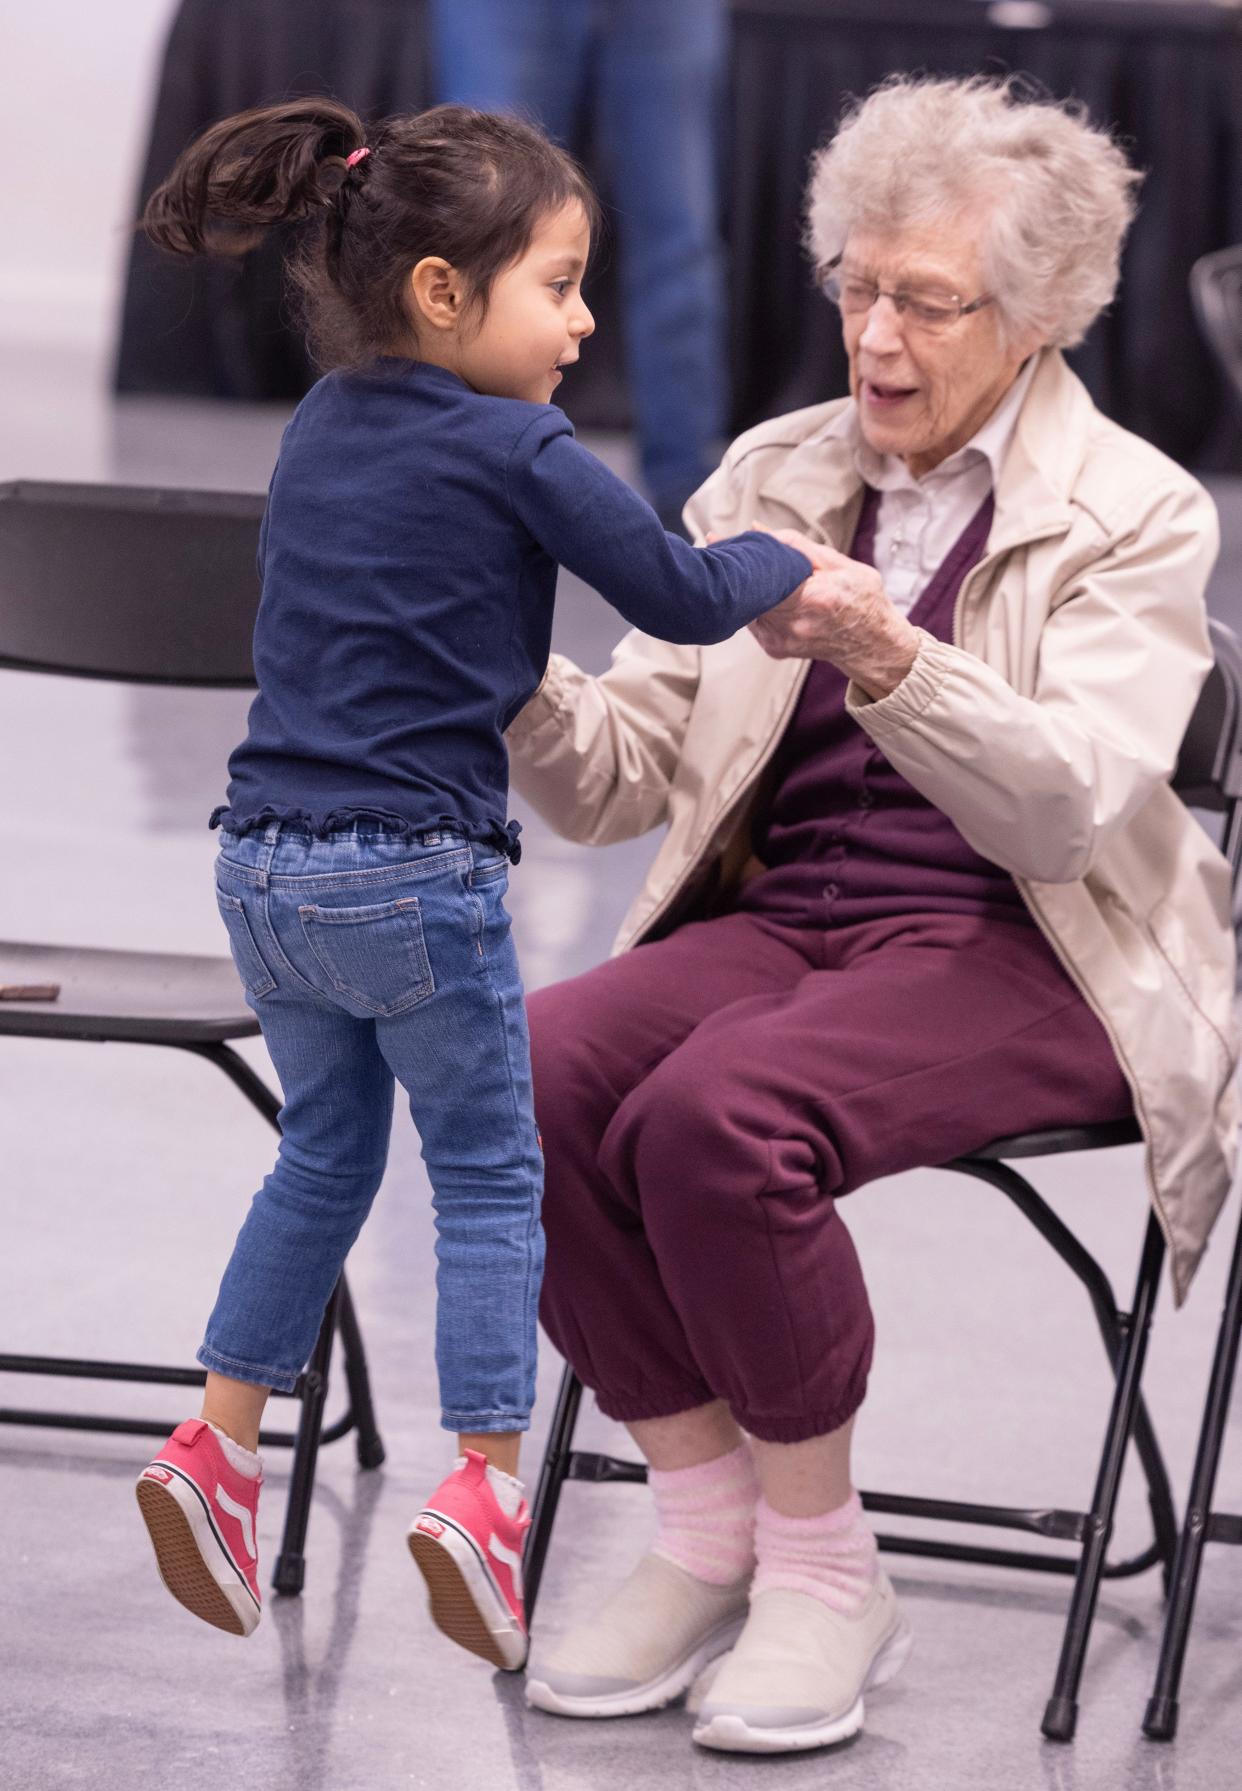 Stephanie Gutierrez, 5, dances with Rosemary Triplett during an intergenerational Artful Living and Learning class at the Massillon Museum.